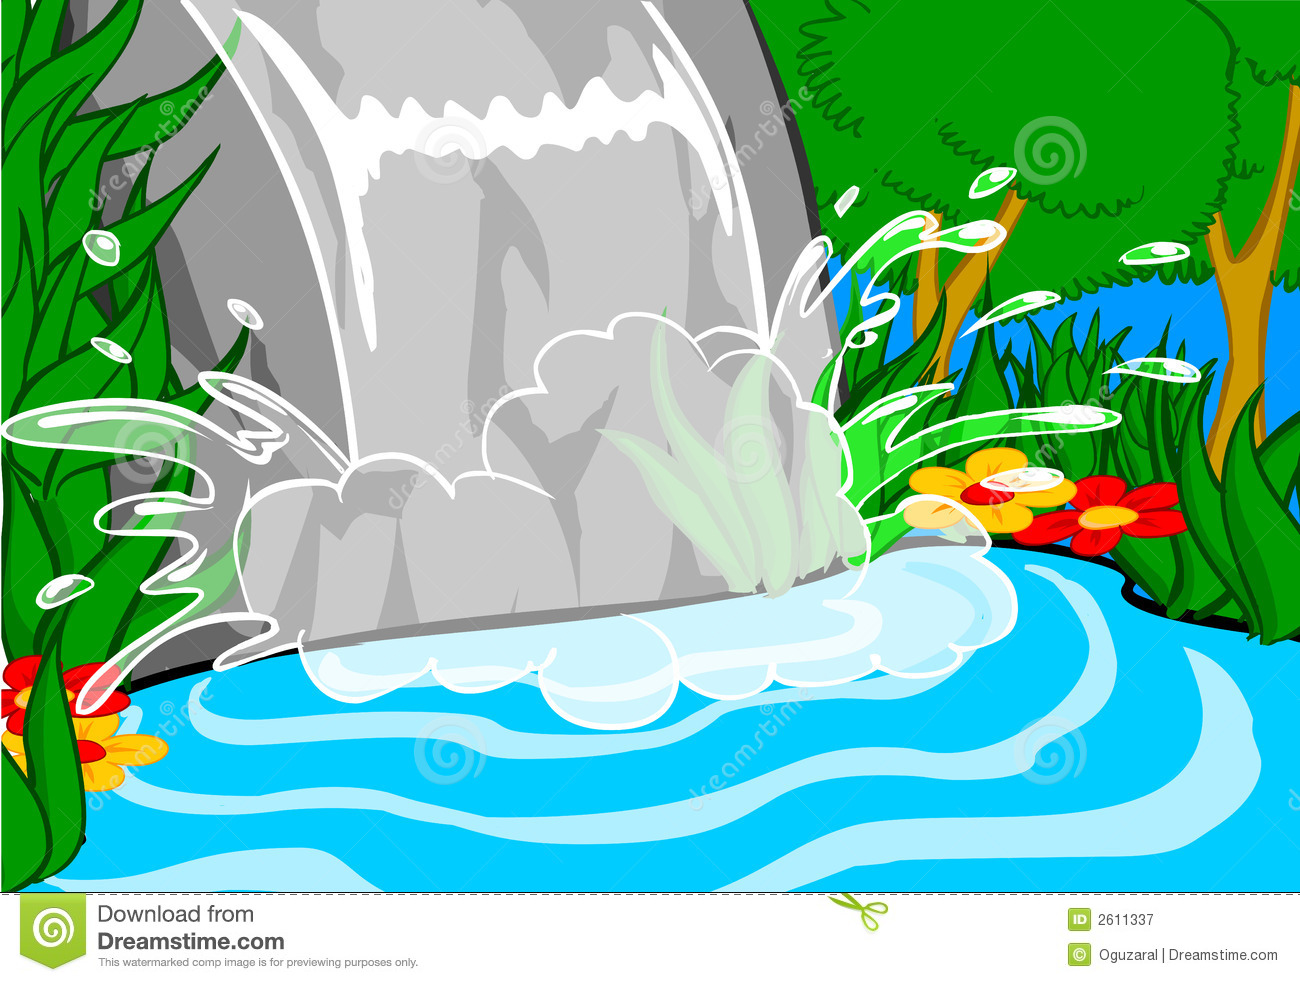 waterfall: Image with .